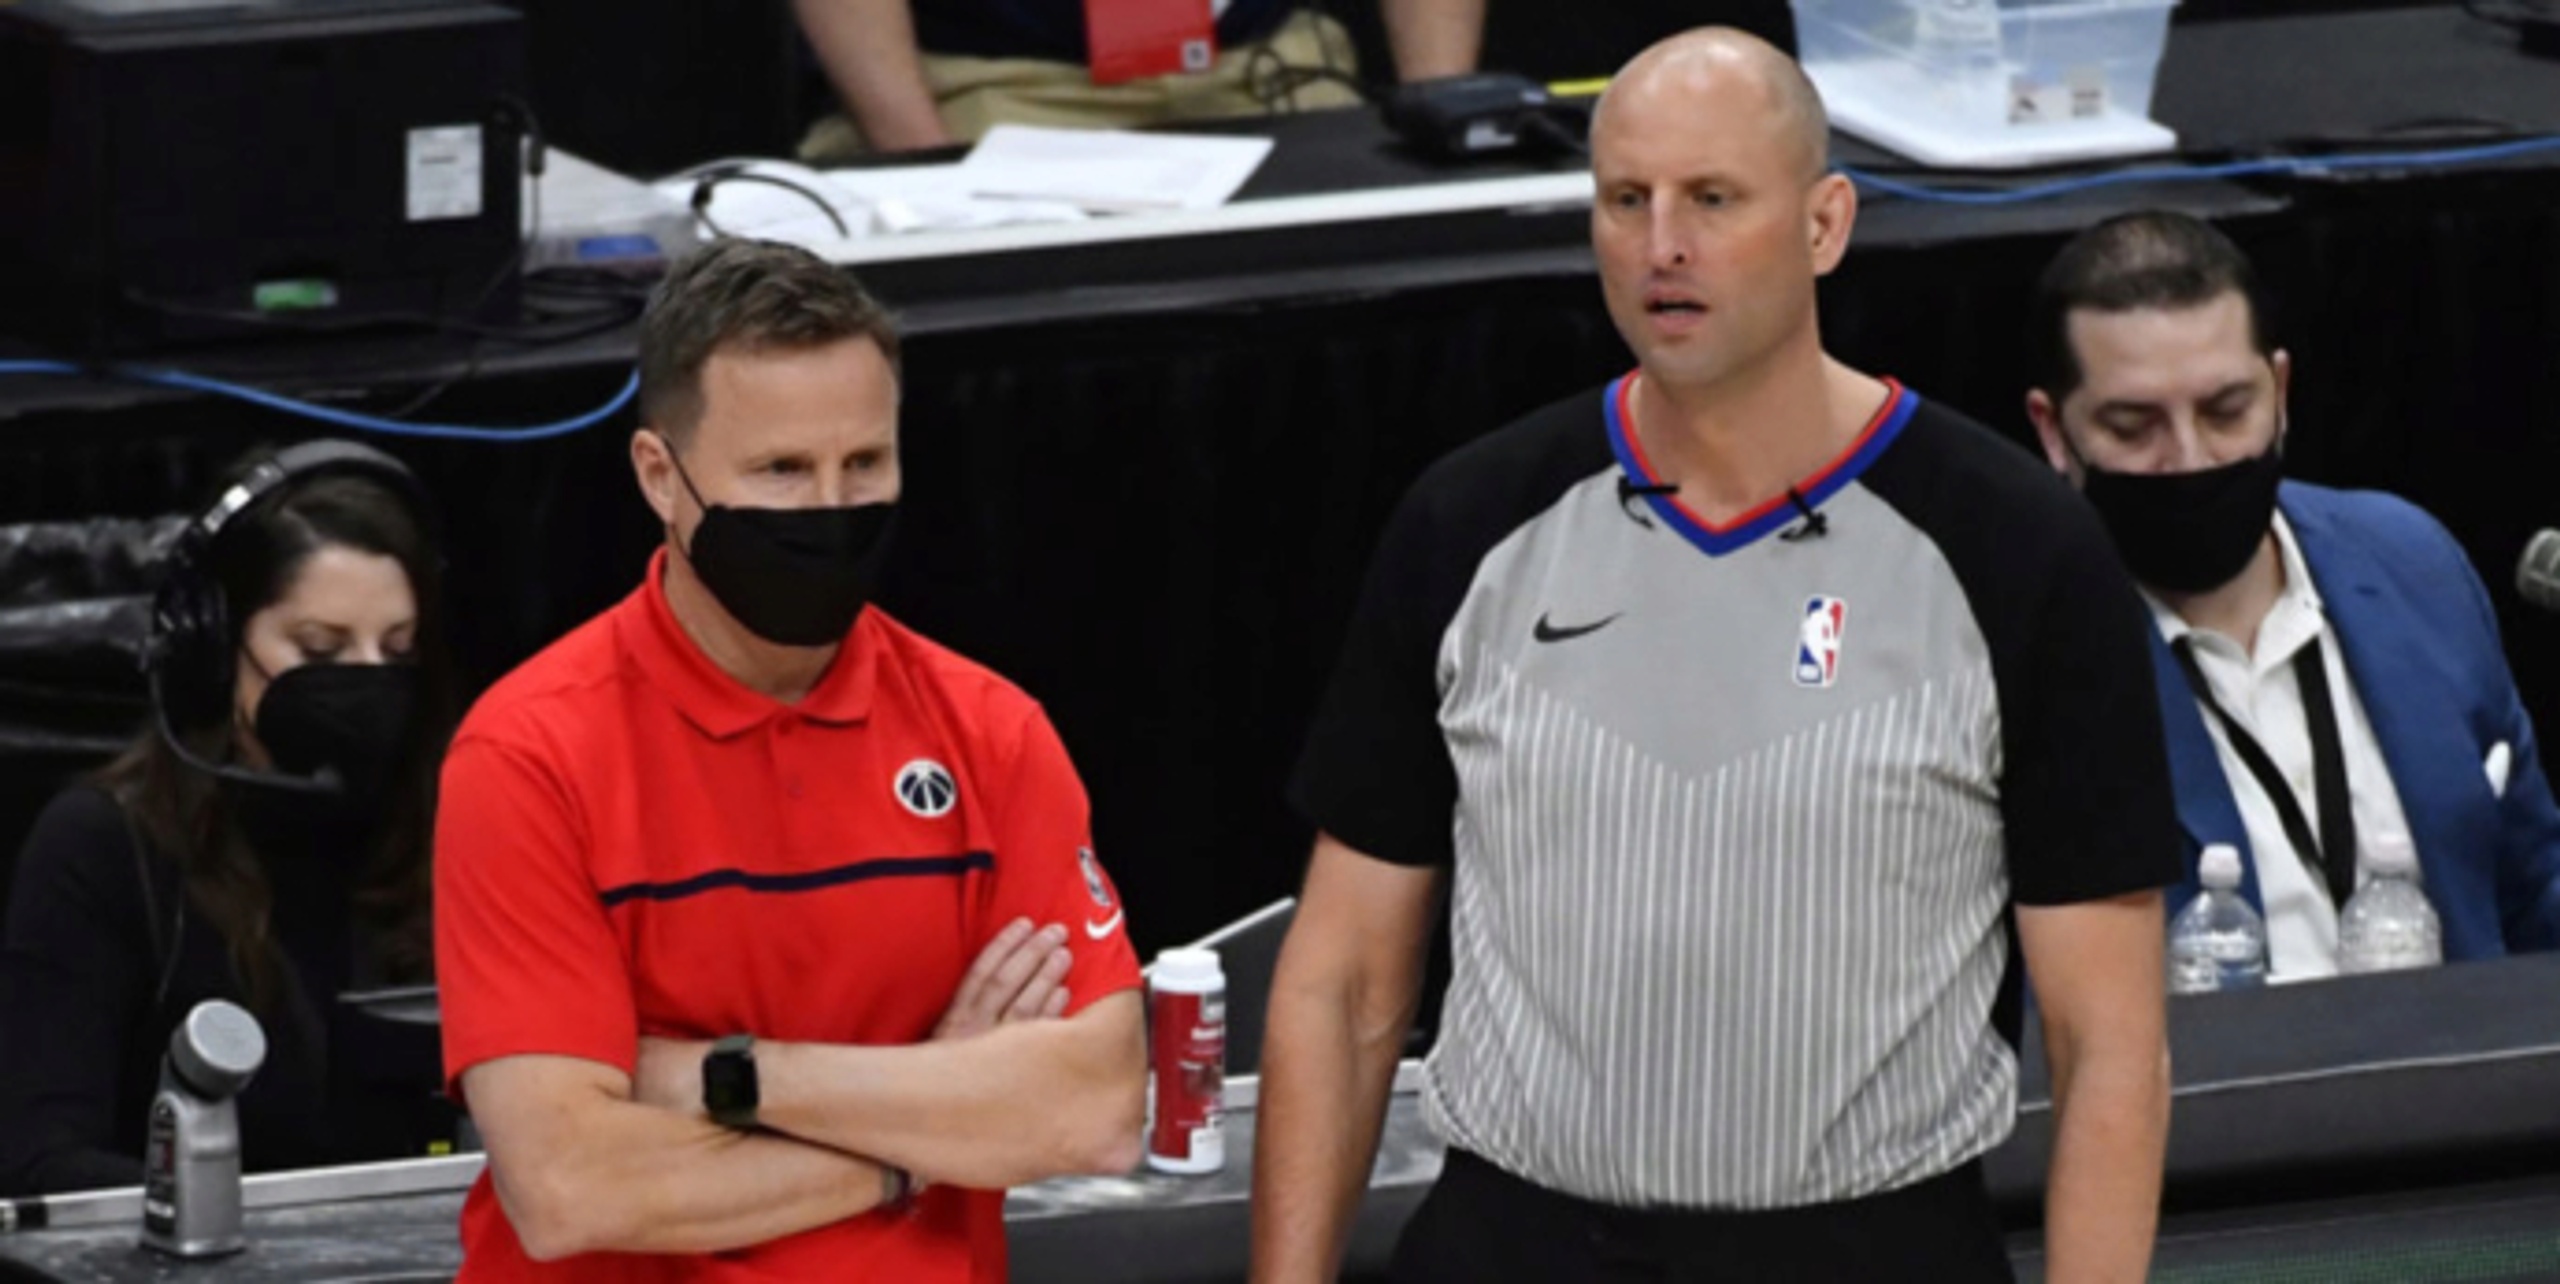 Ten NBA referees sidelined due to issues stemming from COVID-19